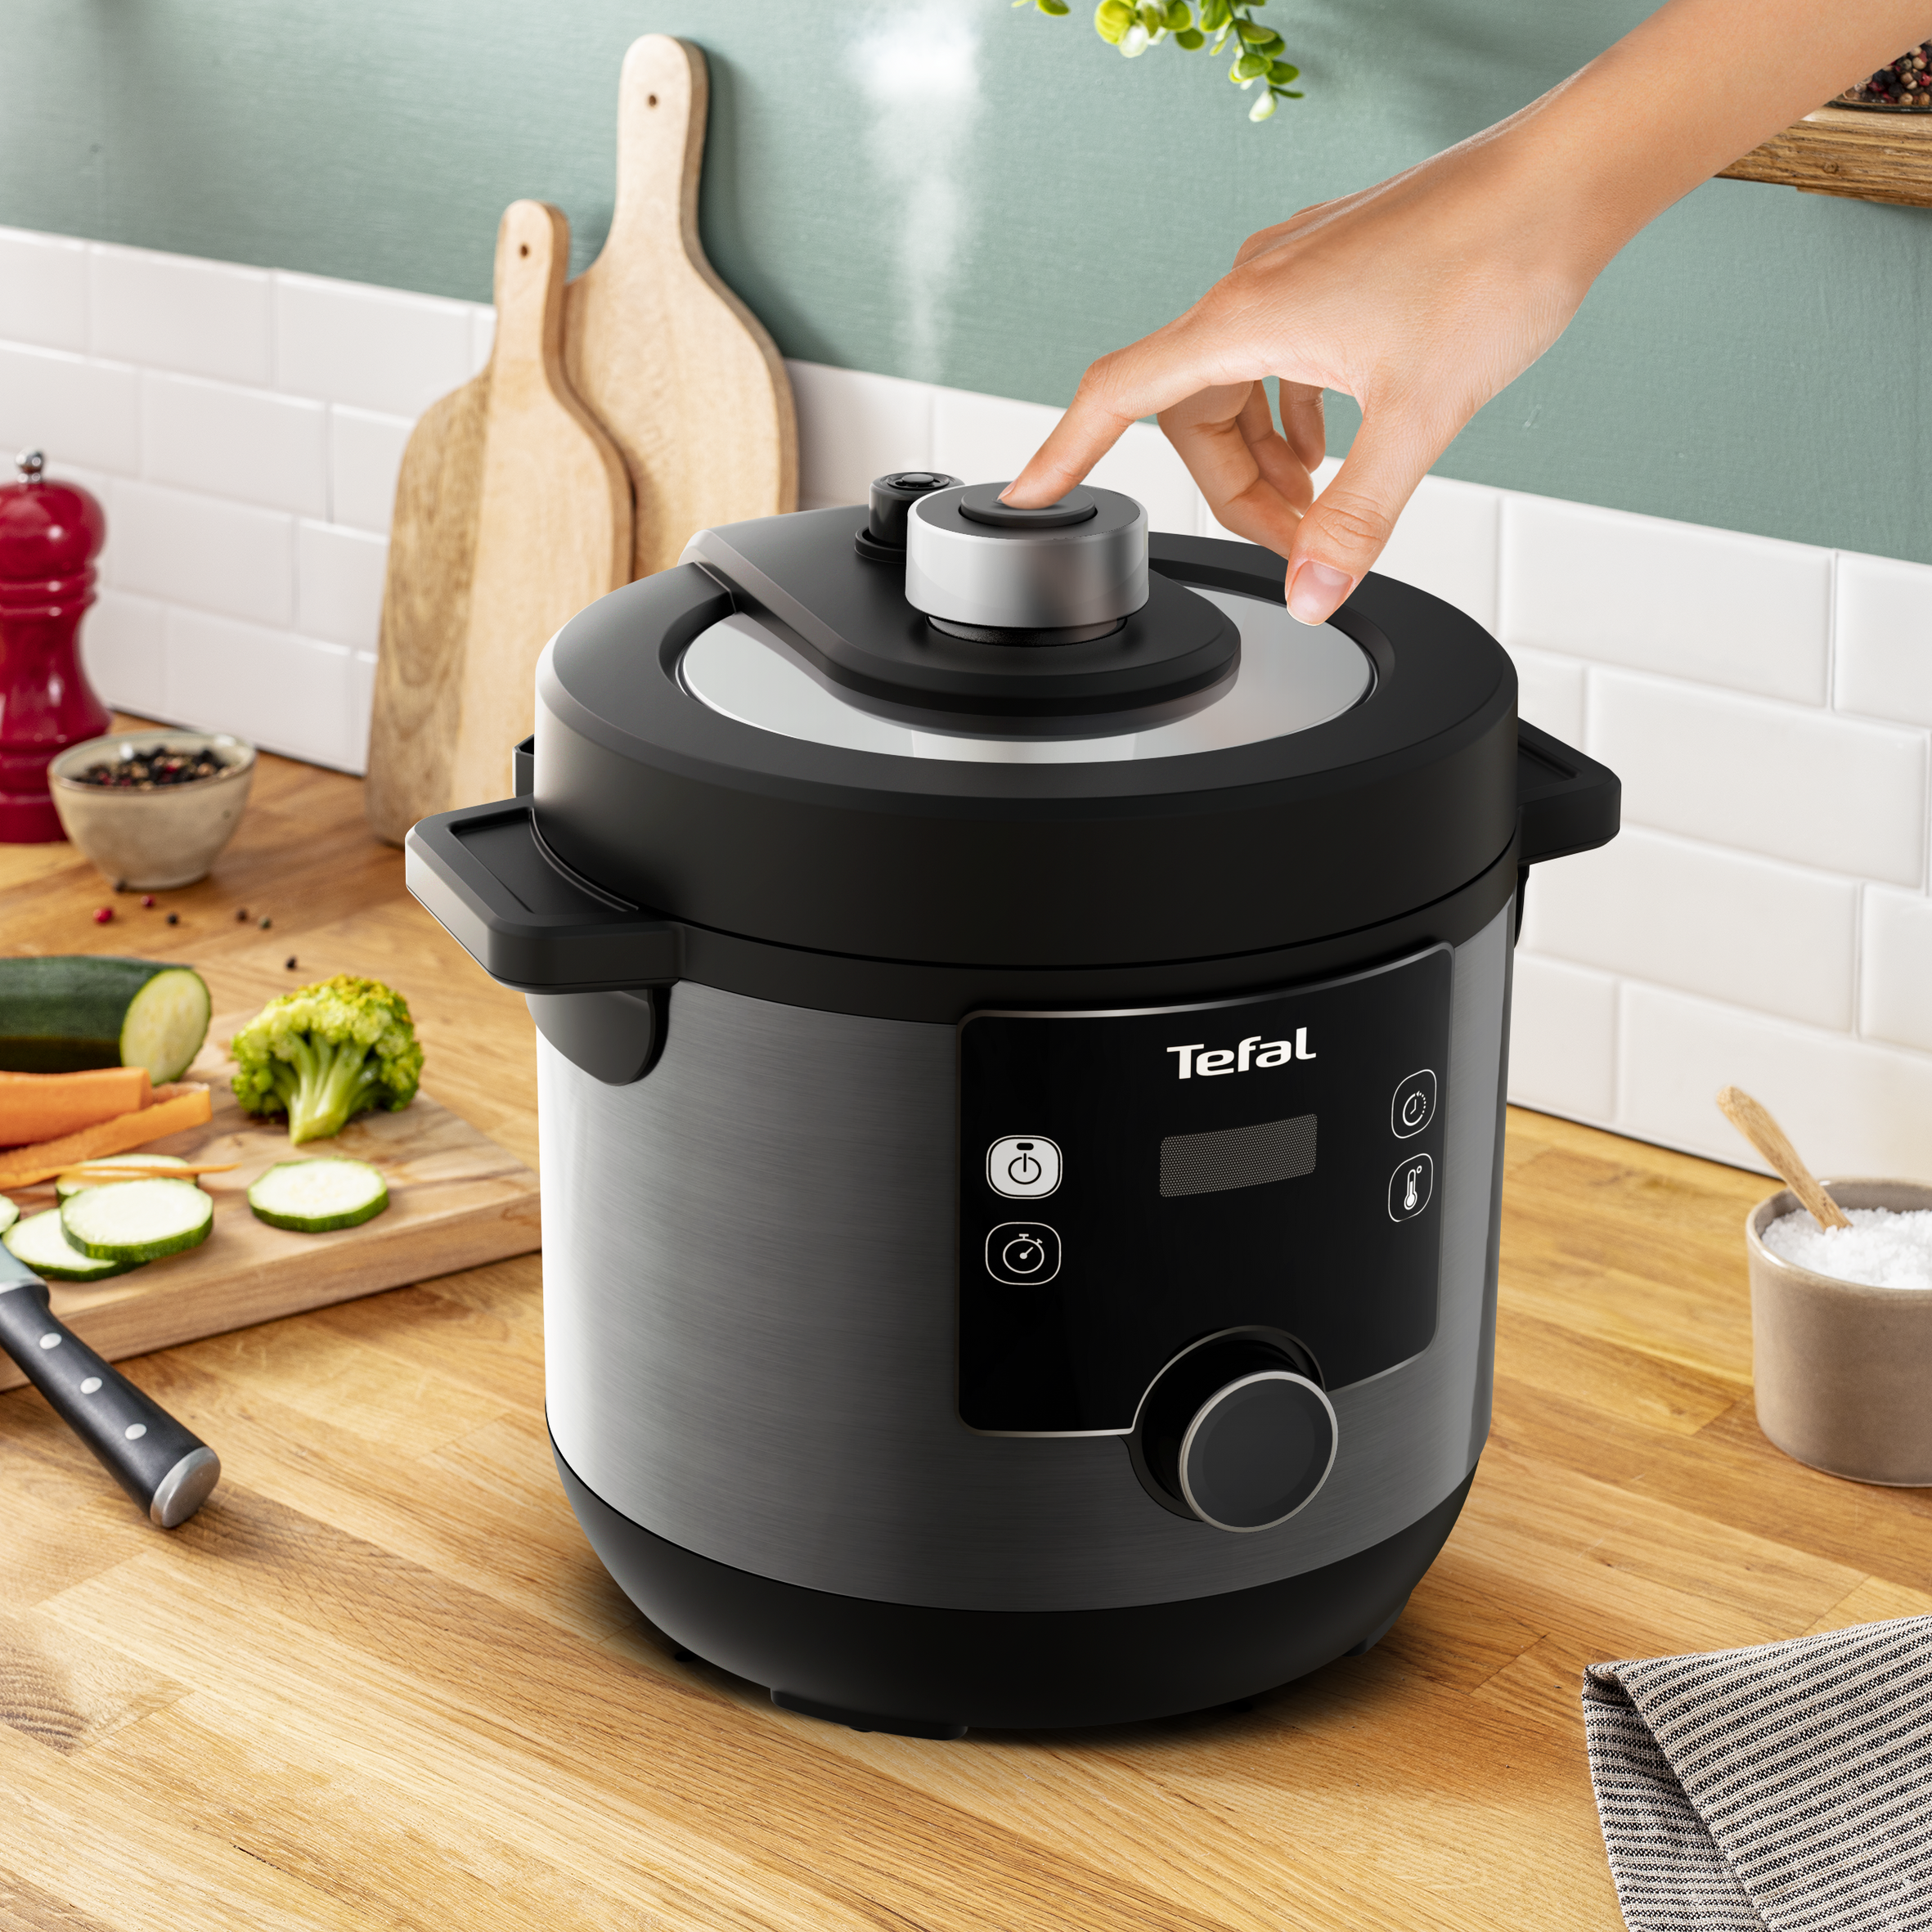 Turbo Cuisine Maxi & Fry Air Fryer and Multicooker CY7788